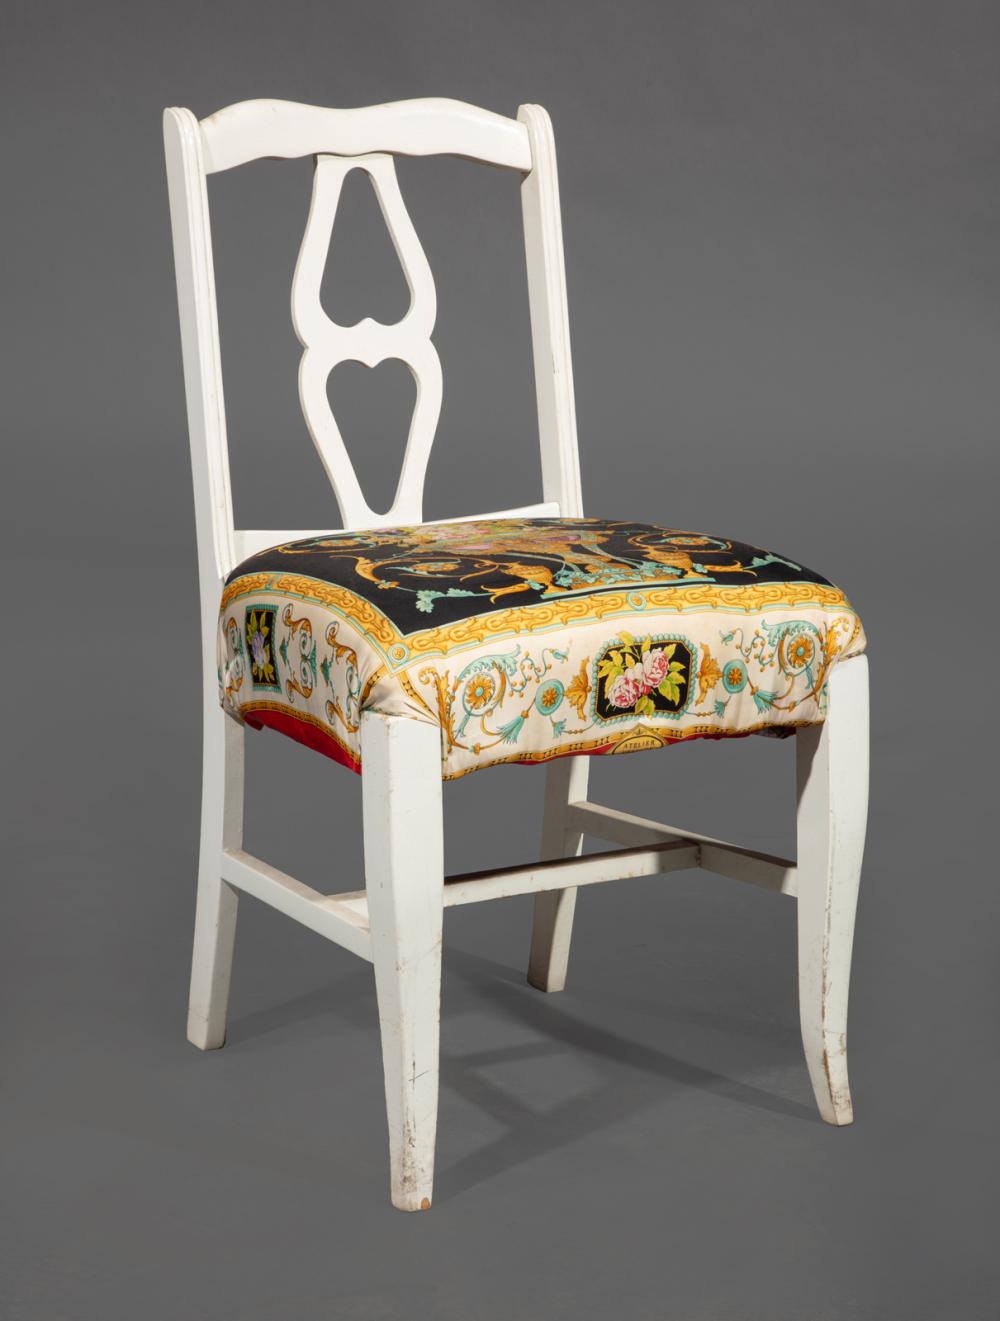 CONTEMPORARY PAINTED SIDE CHAIRContemporary